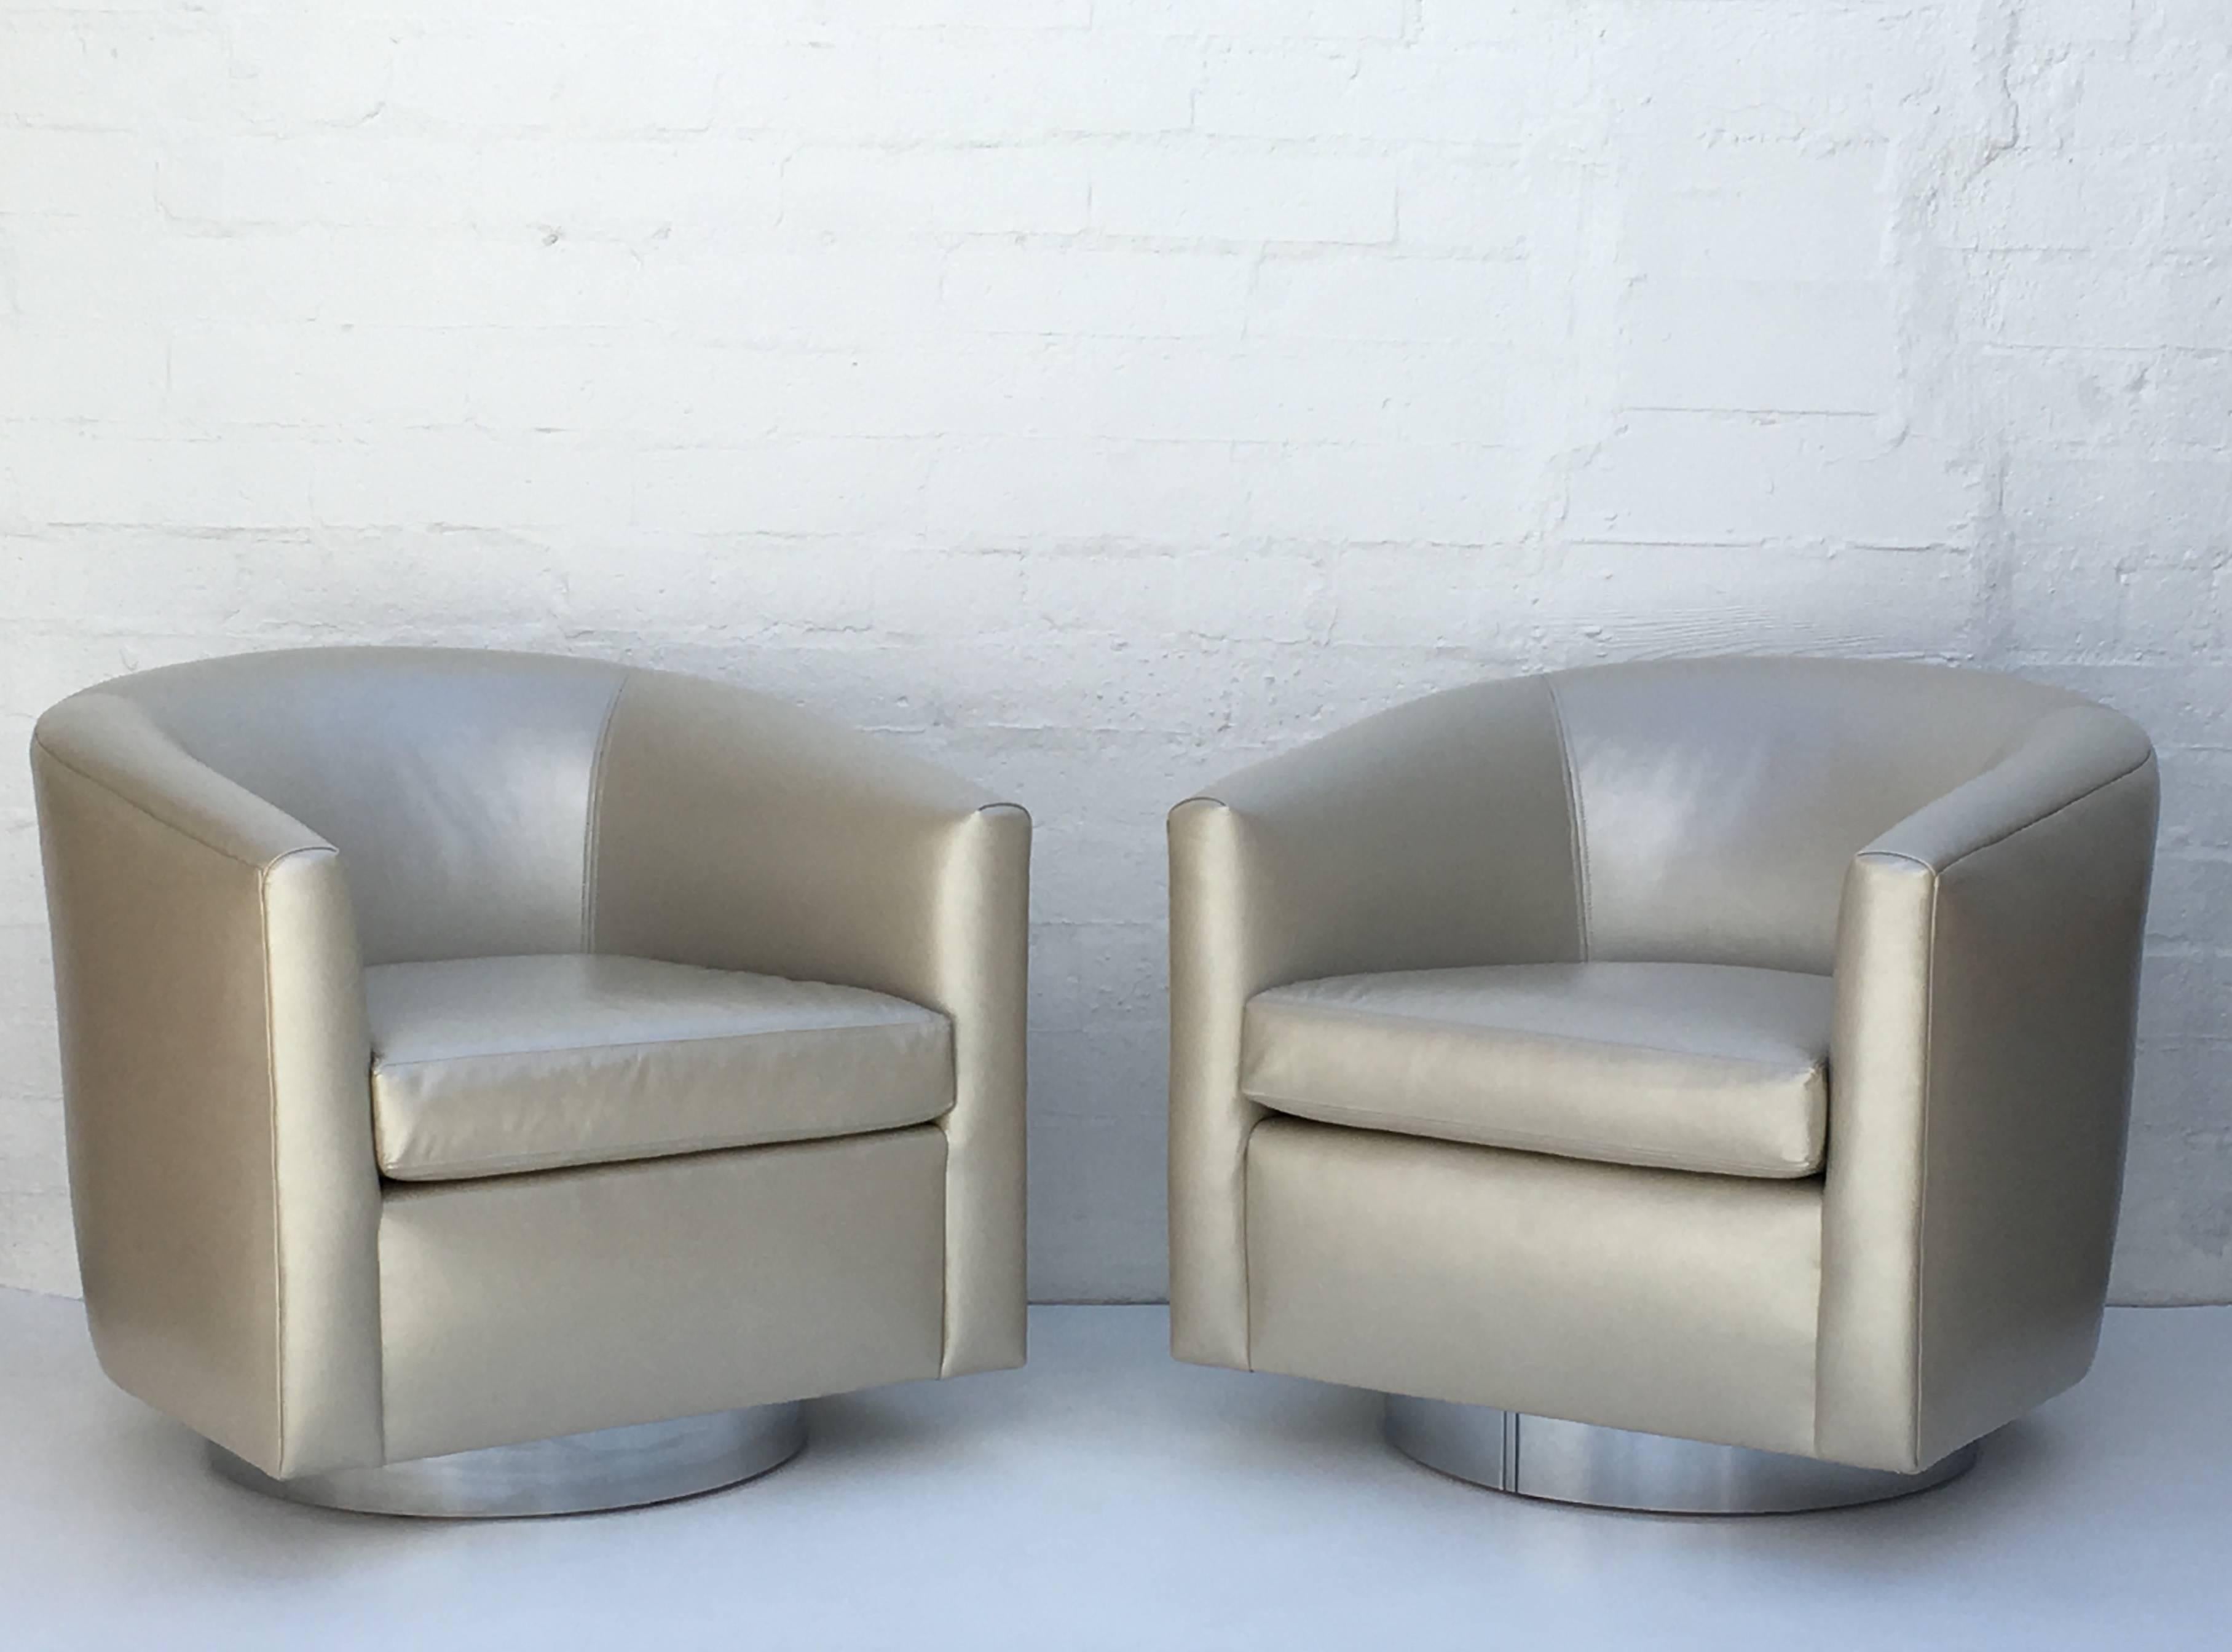 Chrome and Leather Swivel Chairs by Martin Brattrud for Steve Chase 1